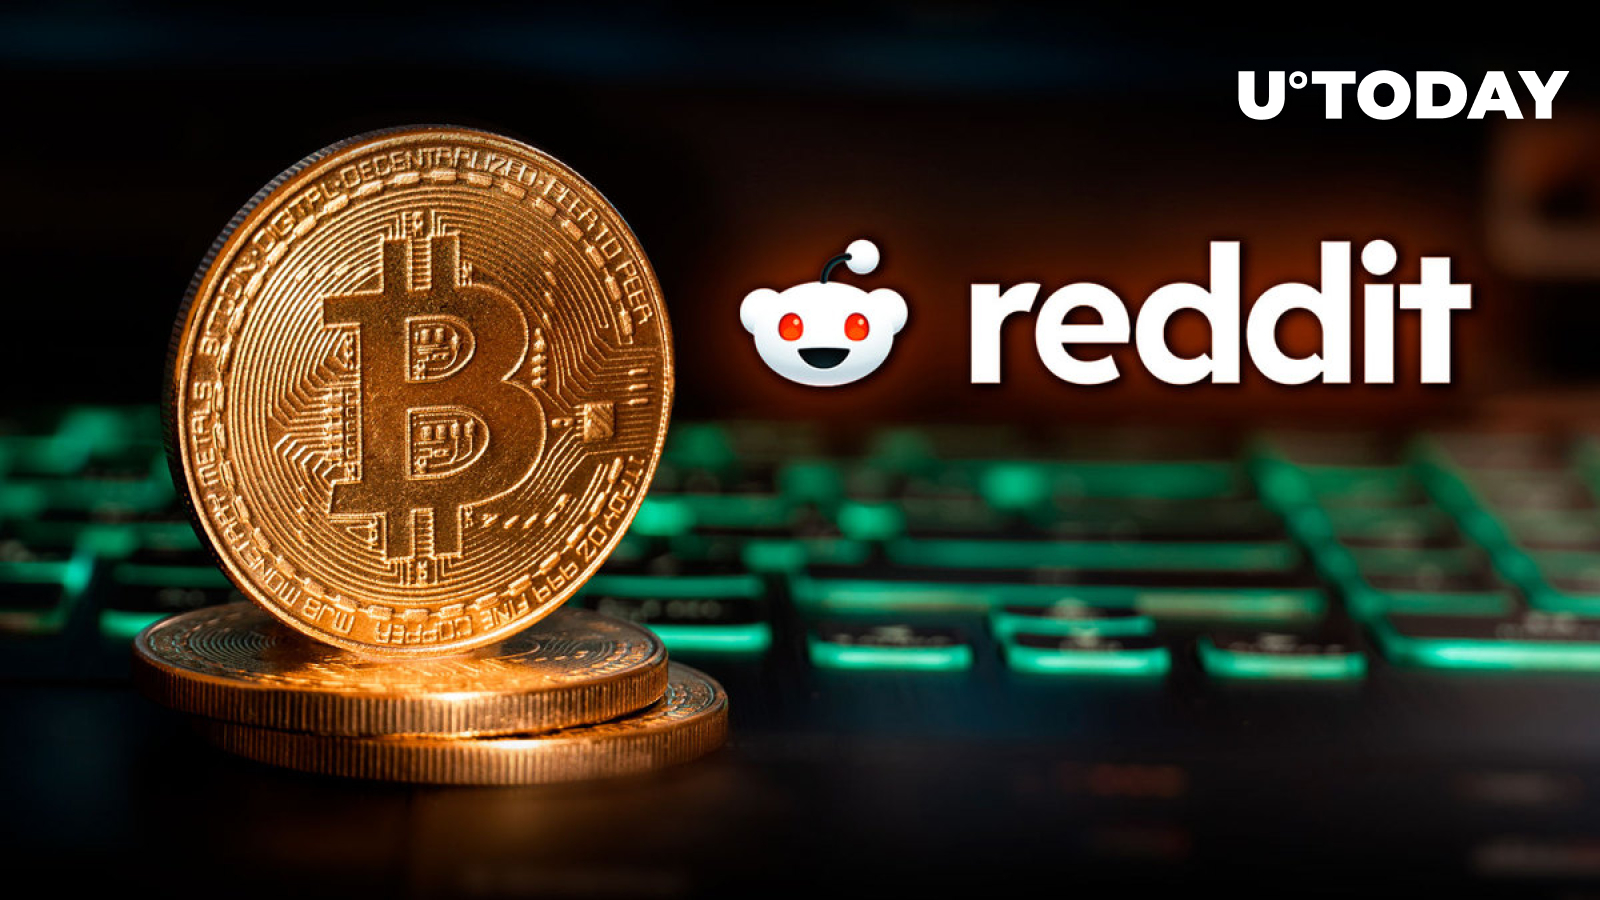 Crypto Winter Will Clean House, Bitcoin Is New Gold: Reddit's Ohanian